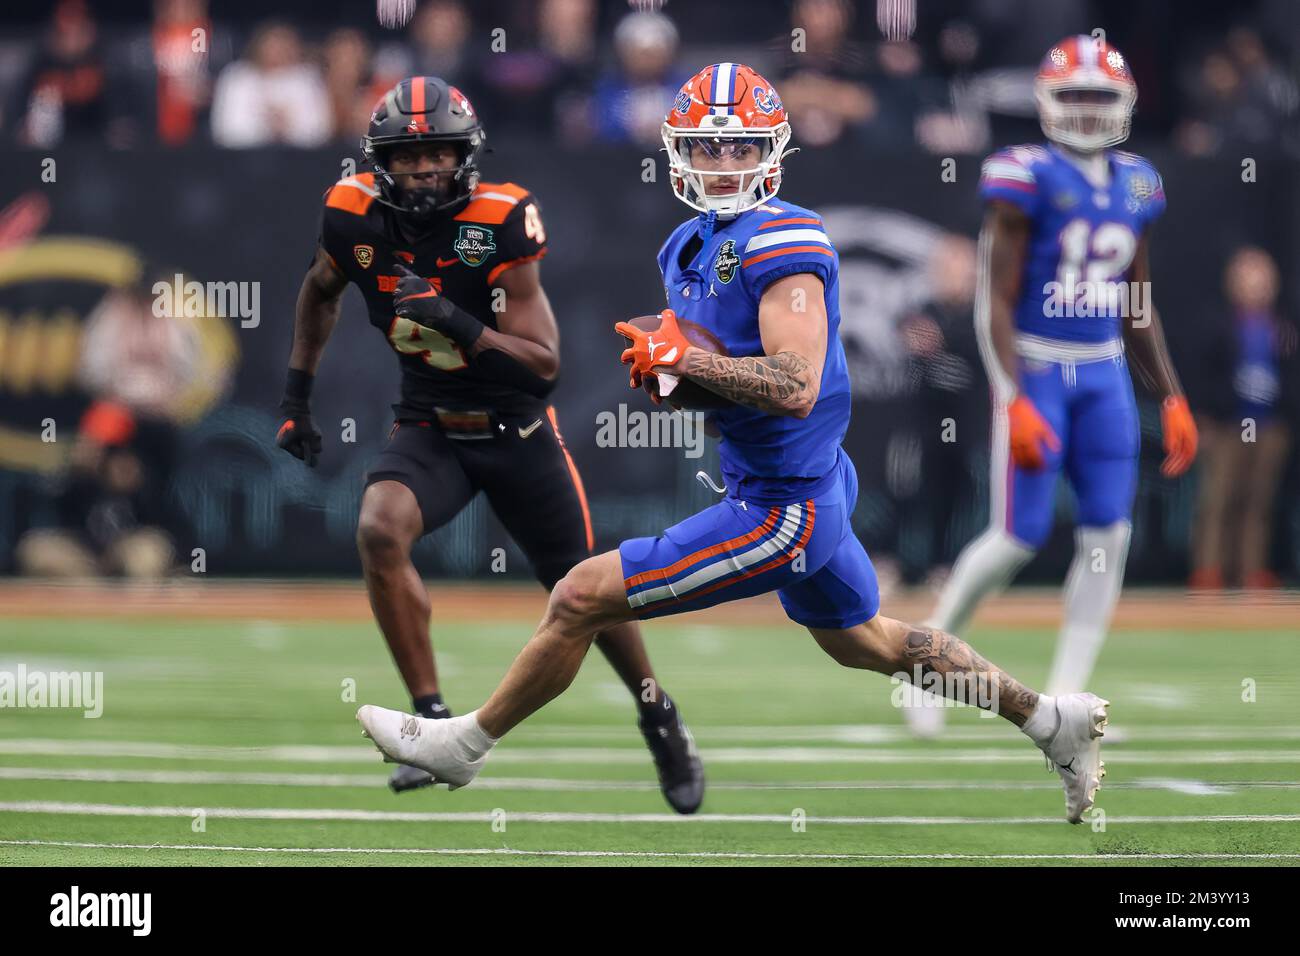 Las Vegas, NV, USA. 17th Dec, 2022. Florida Gators wide receiver Ricky Pearsall (1) runs after catching the football during the first half of the SRS Distribution Las Vegas Bowl featuring the Florida Gators and the Oregon State Beavers at Allegiant Stadium in Las Vegas, NV. Christopher Trim/CSM/Alamy Live News Stock Photo